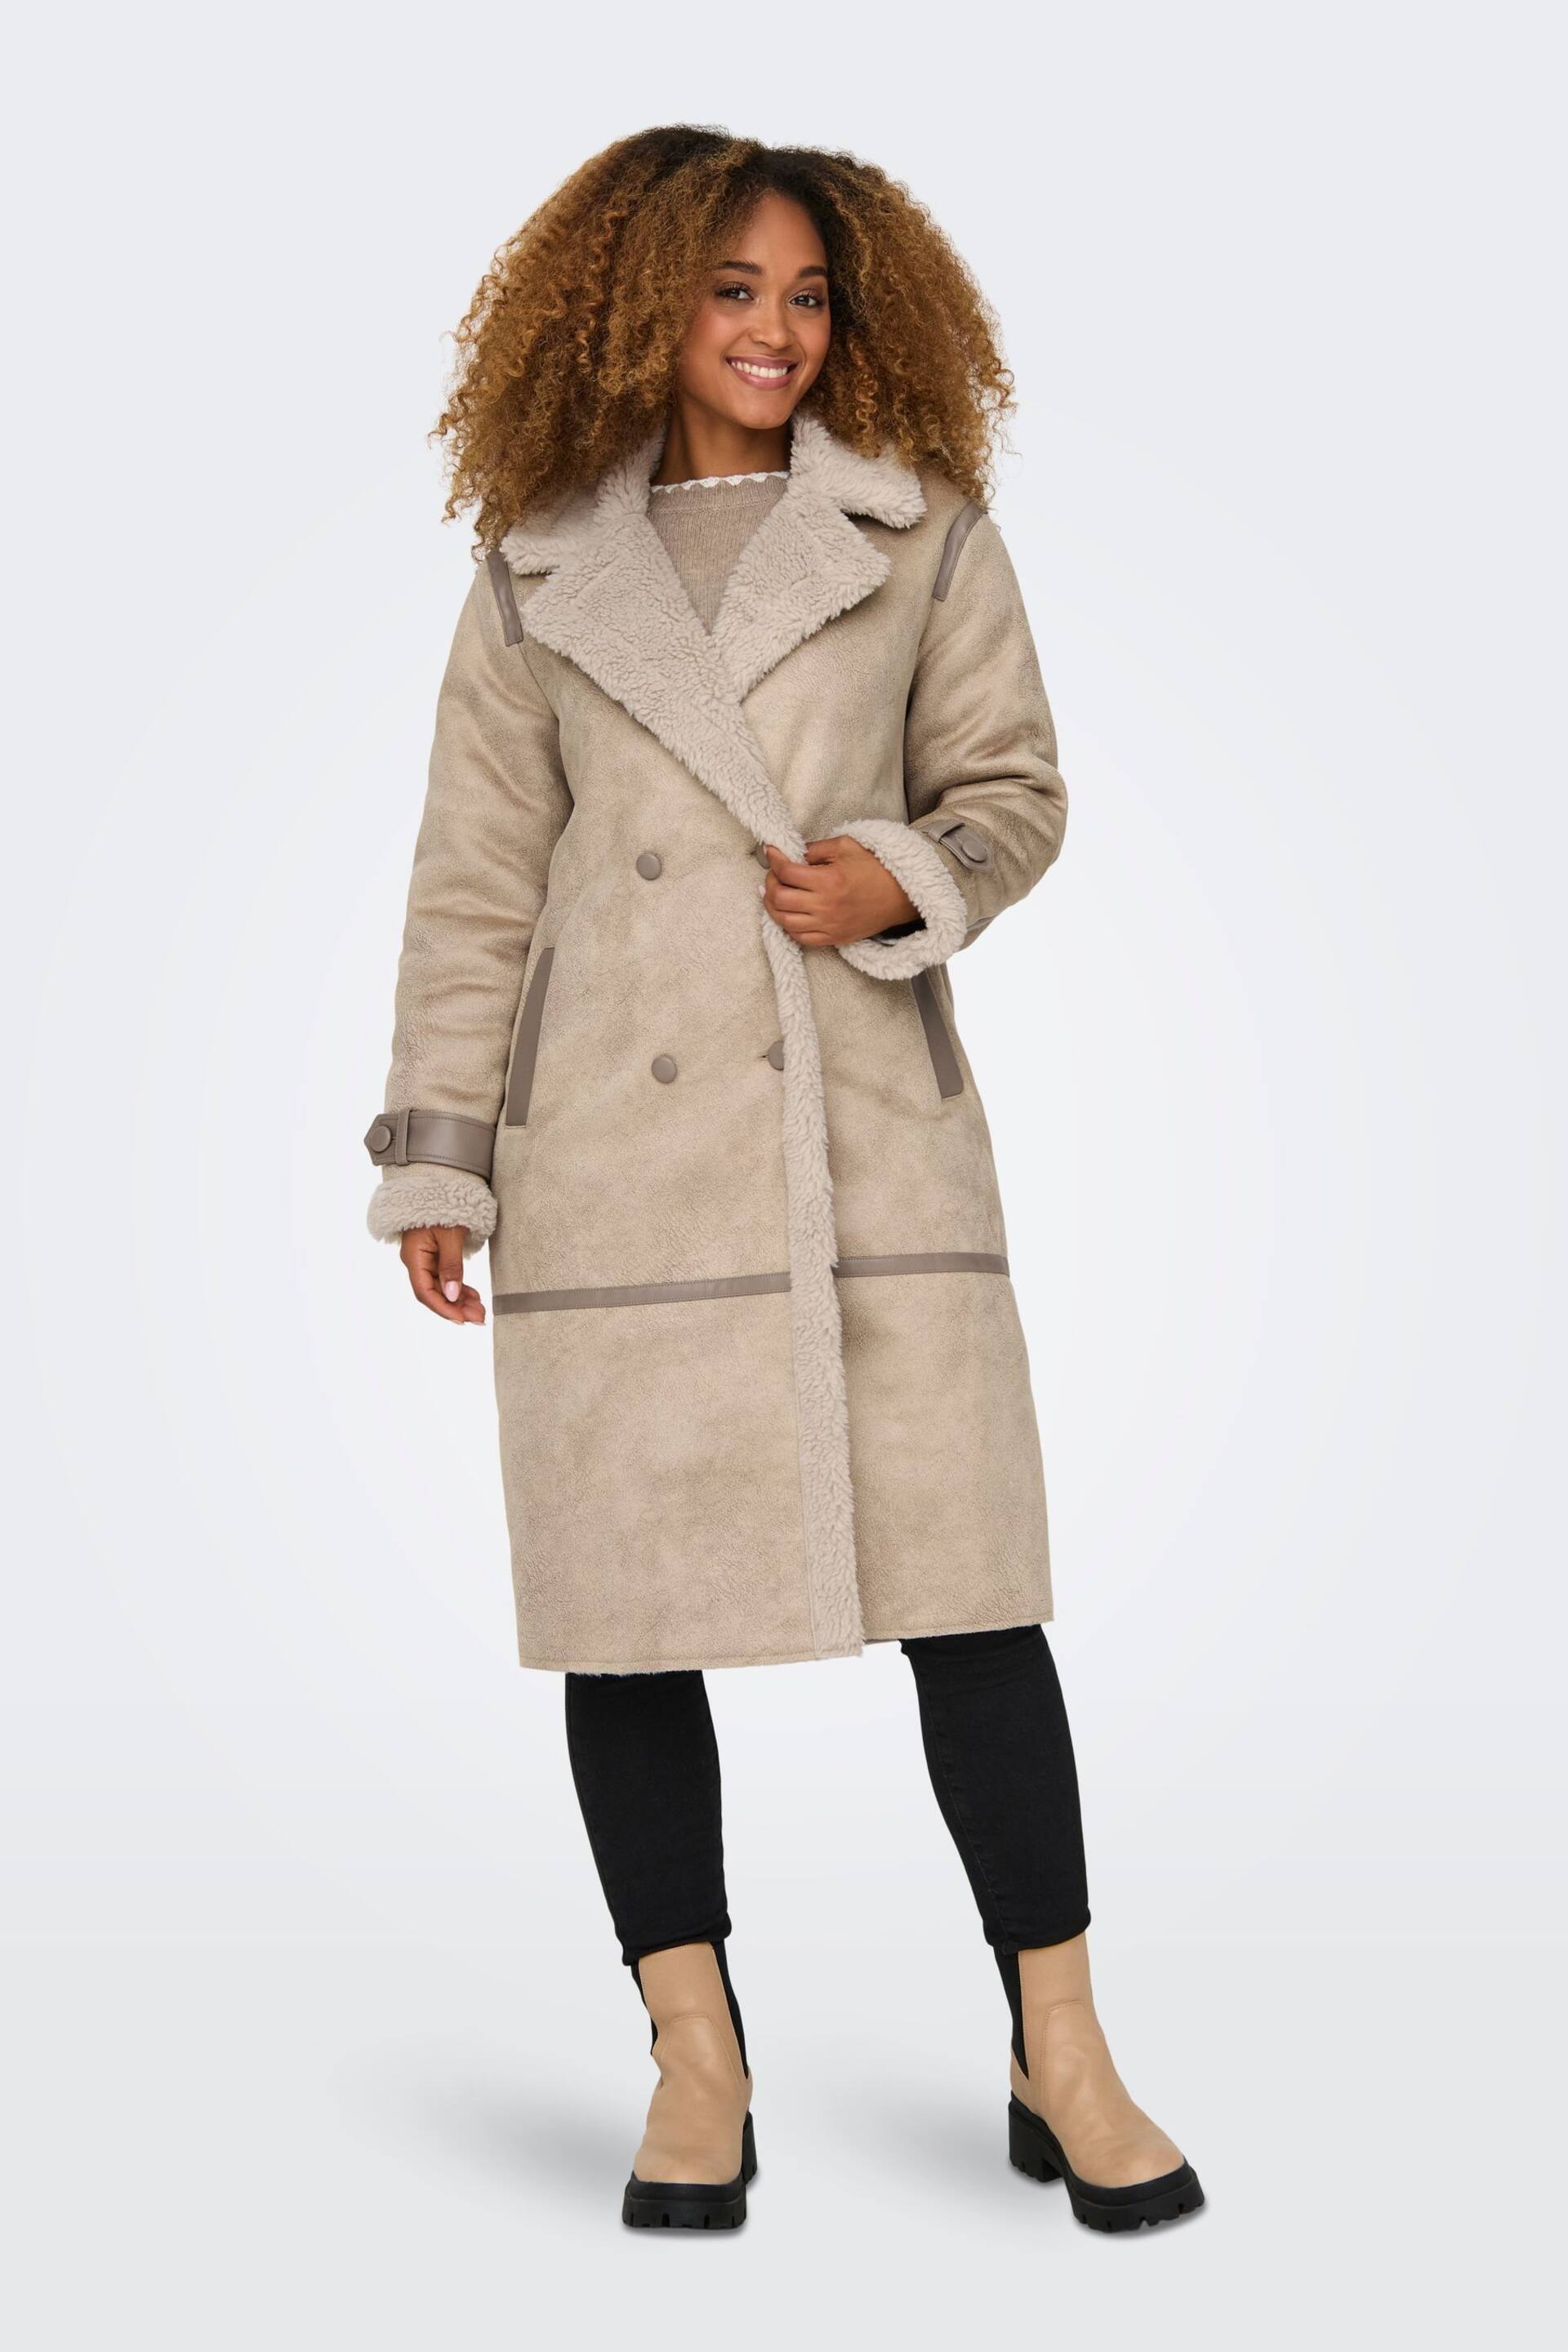 ONLY Cream Longline Cosy Teddy Button Up Aviator Coat - Image 3 of 5